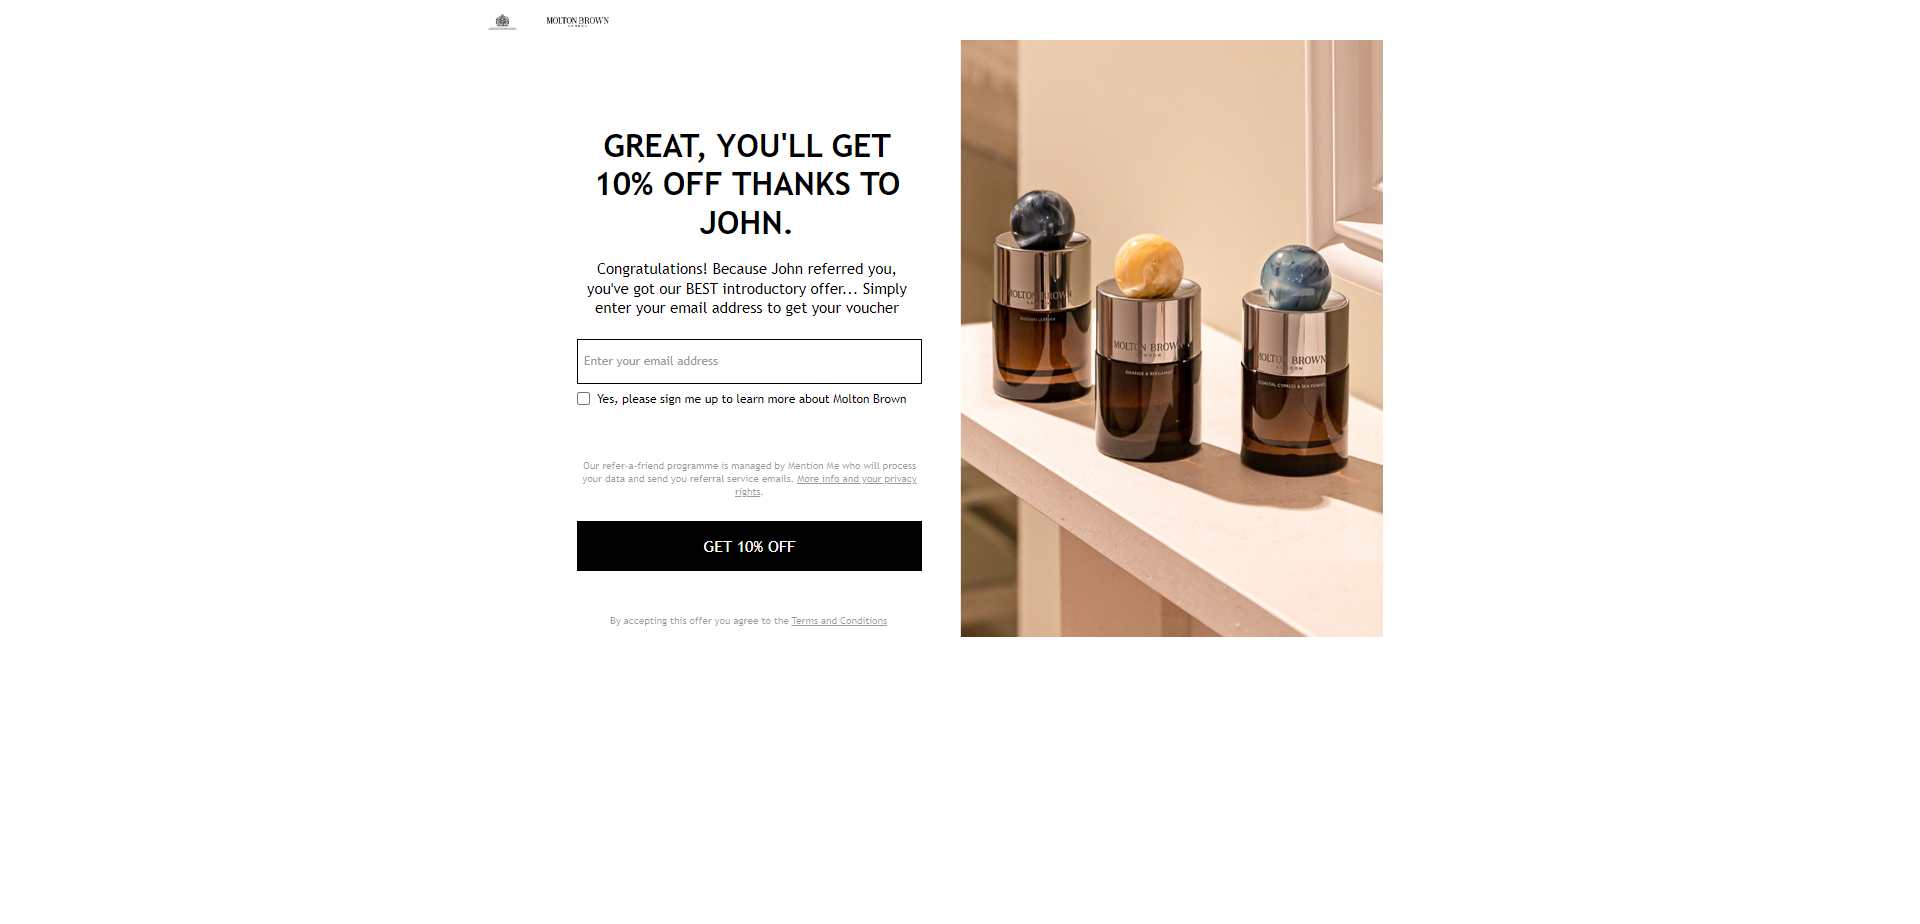 Referral Landing Page for Molton Brown